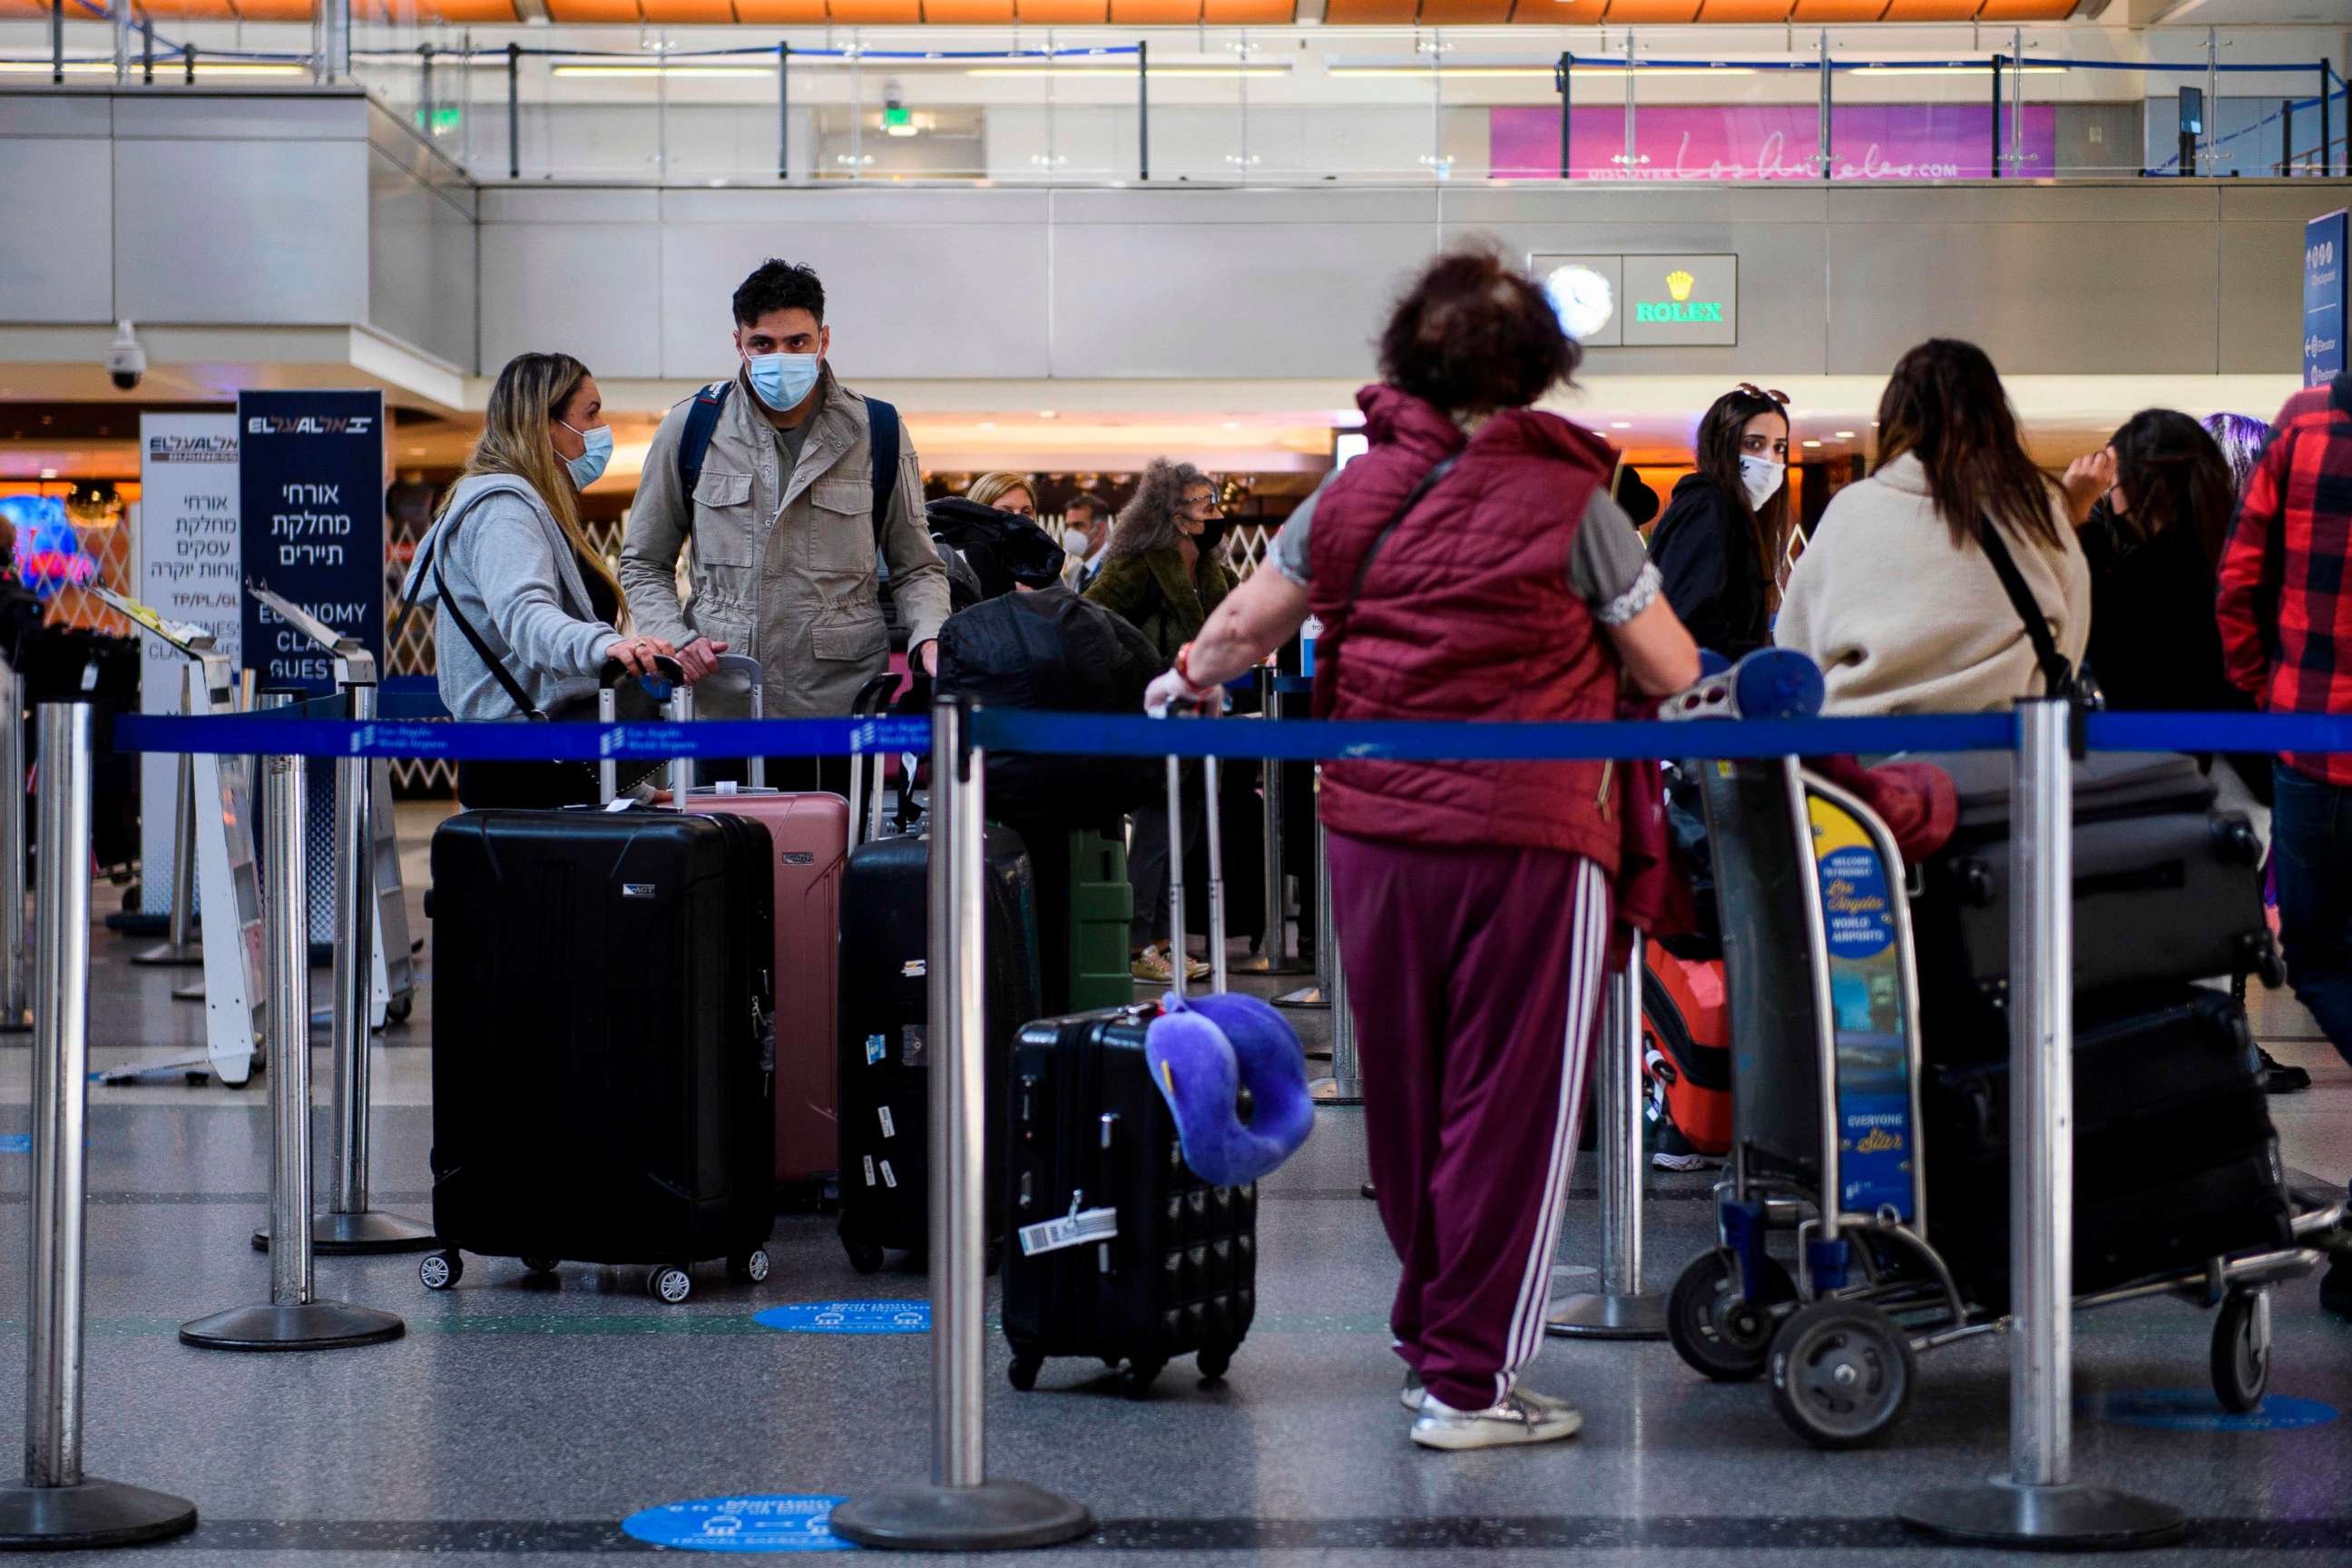 PHOTO: Travelers check-in for a flight inside the Tom Bradley International Terminal at Los Angeles International Airport amid increased COVID-19 travel restrictions, Jan. 25, 2021, in Los Angeles.